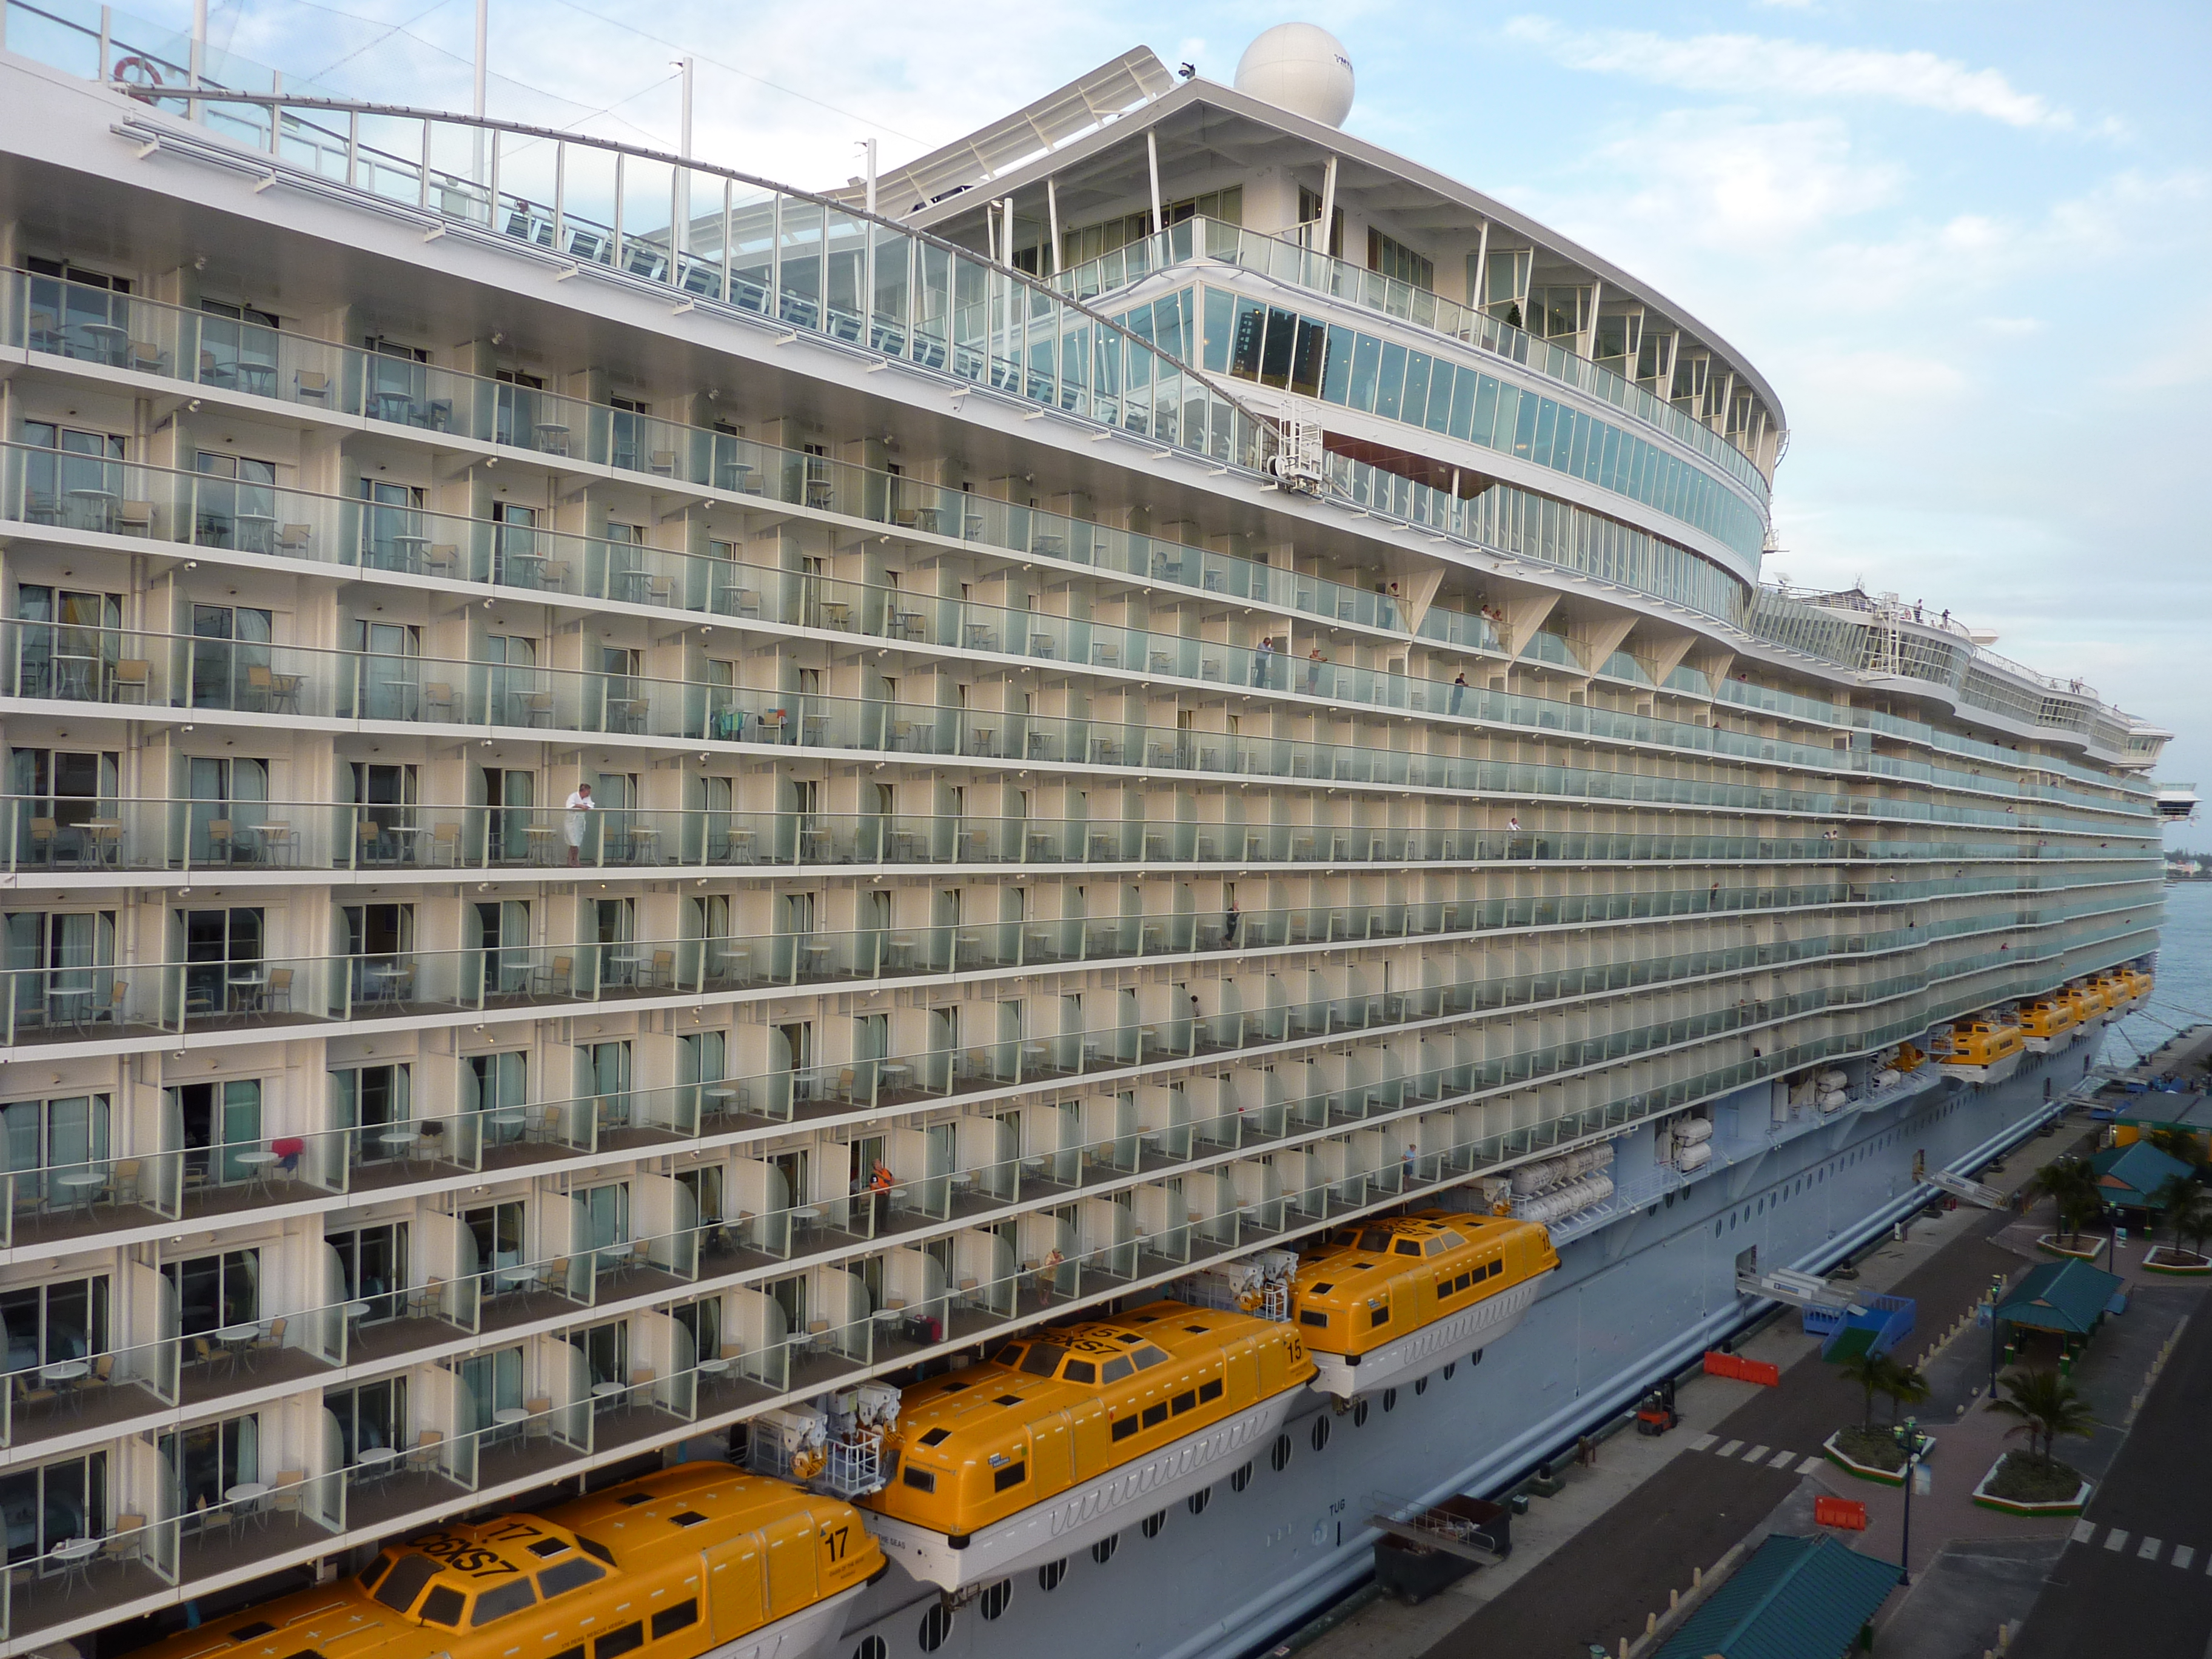 Oasis of the seas ship-outside fort lauderdale photo